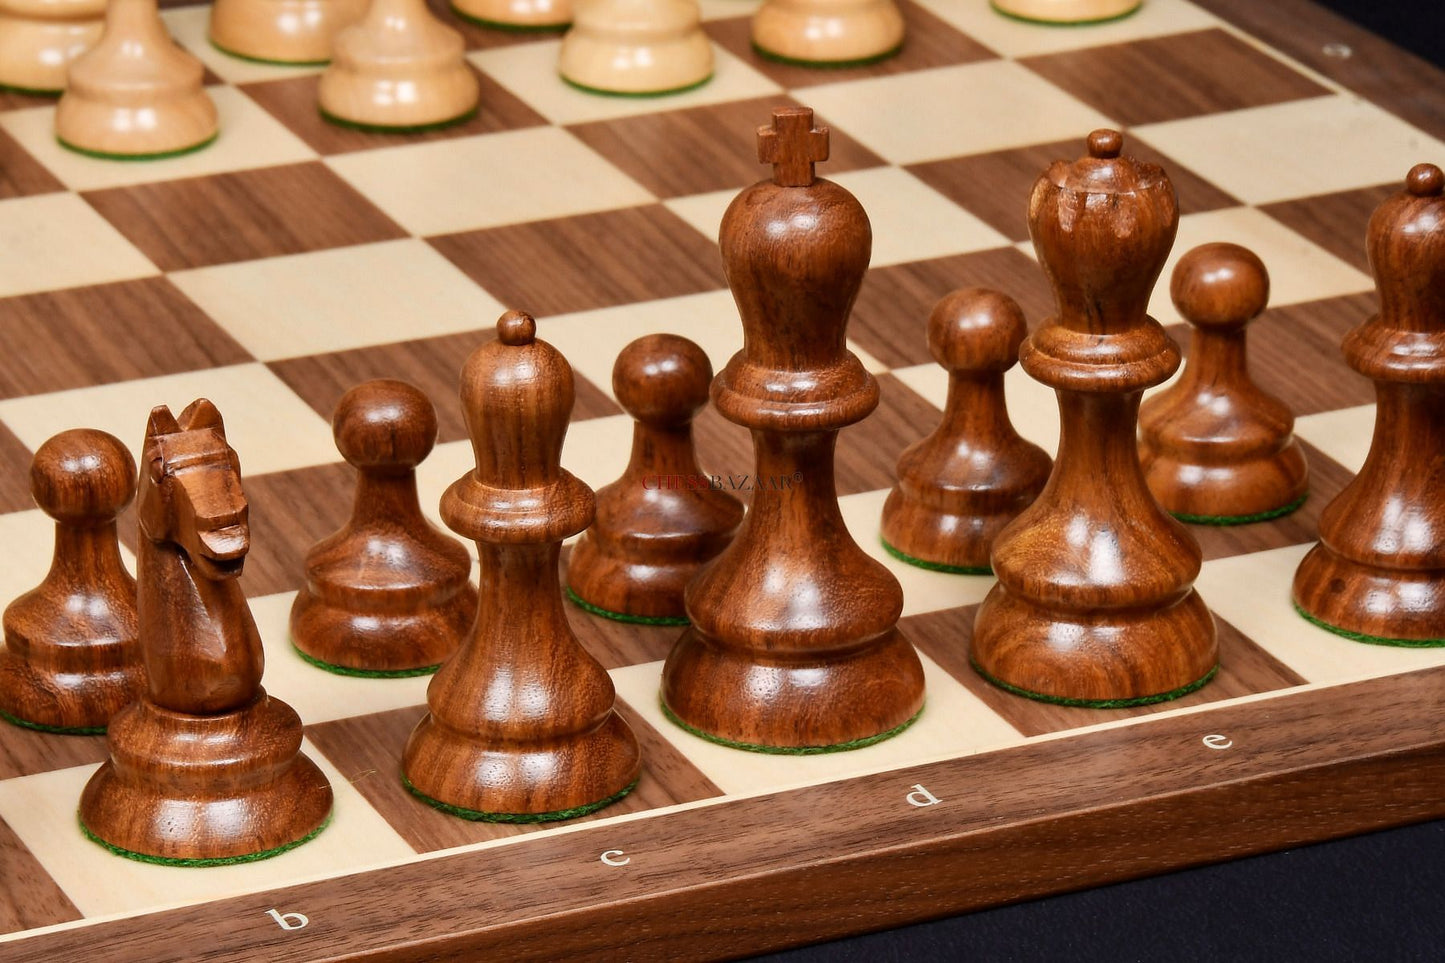 The 1937 7th Stockholm Olympiad Reproduced Chess Pieces in Sheesham Wood & Box Wood - 3.75" King